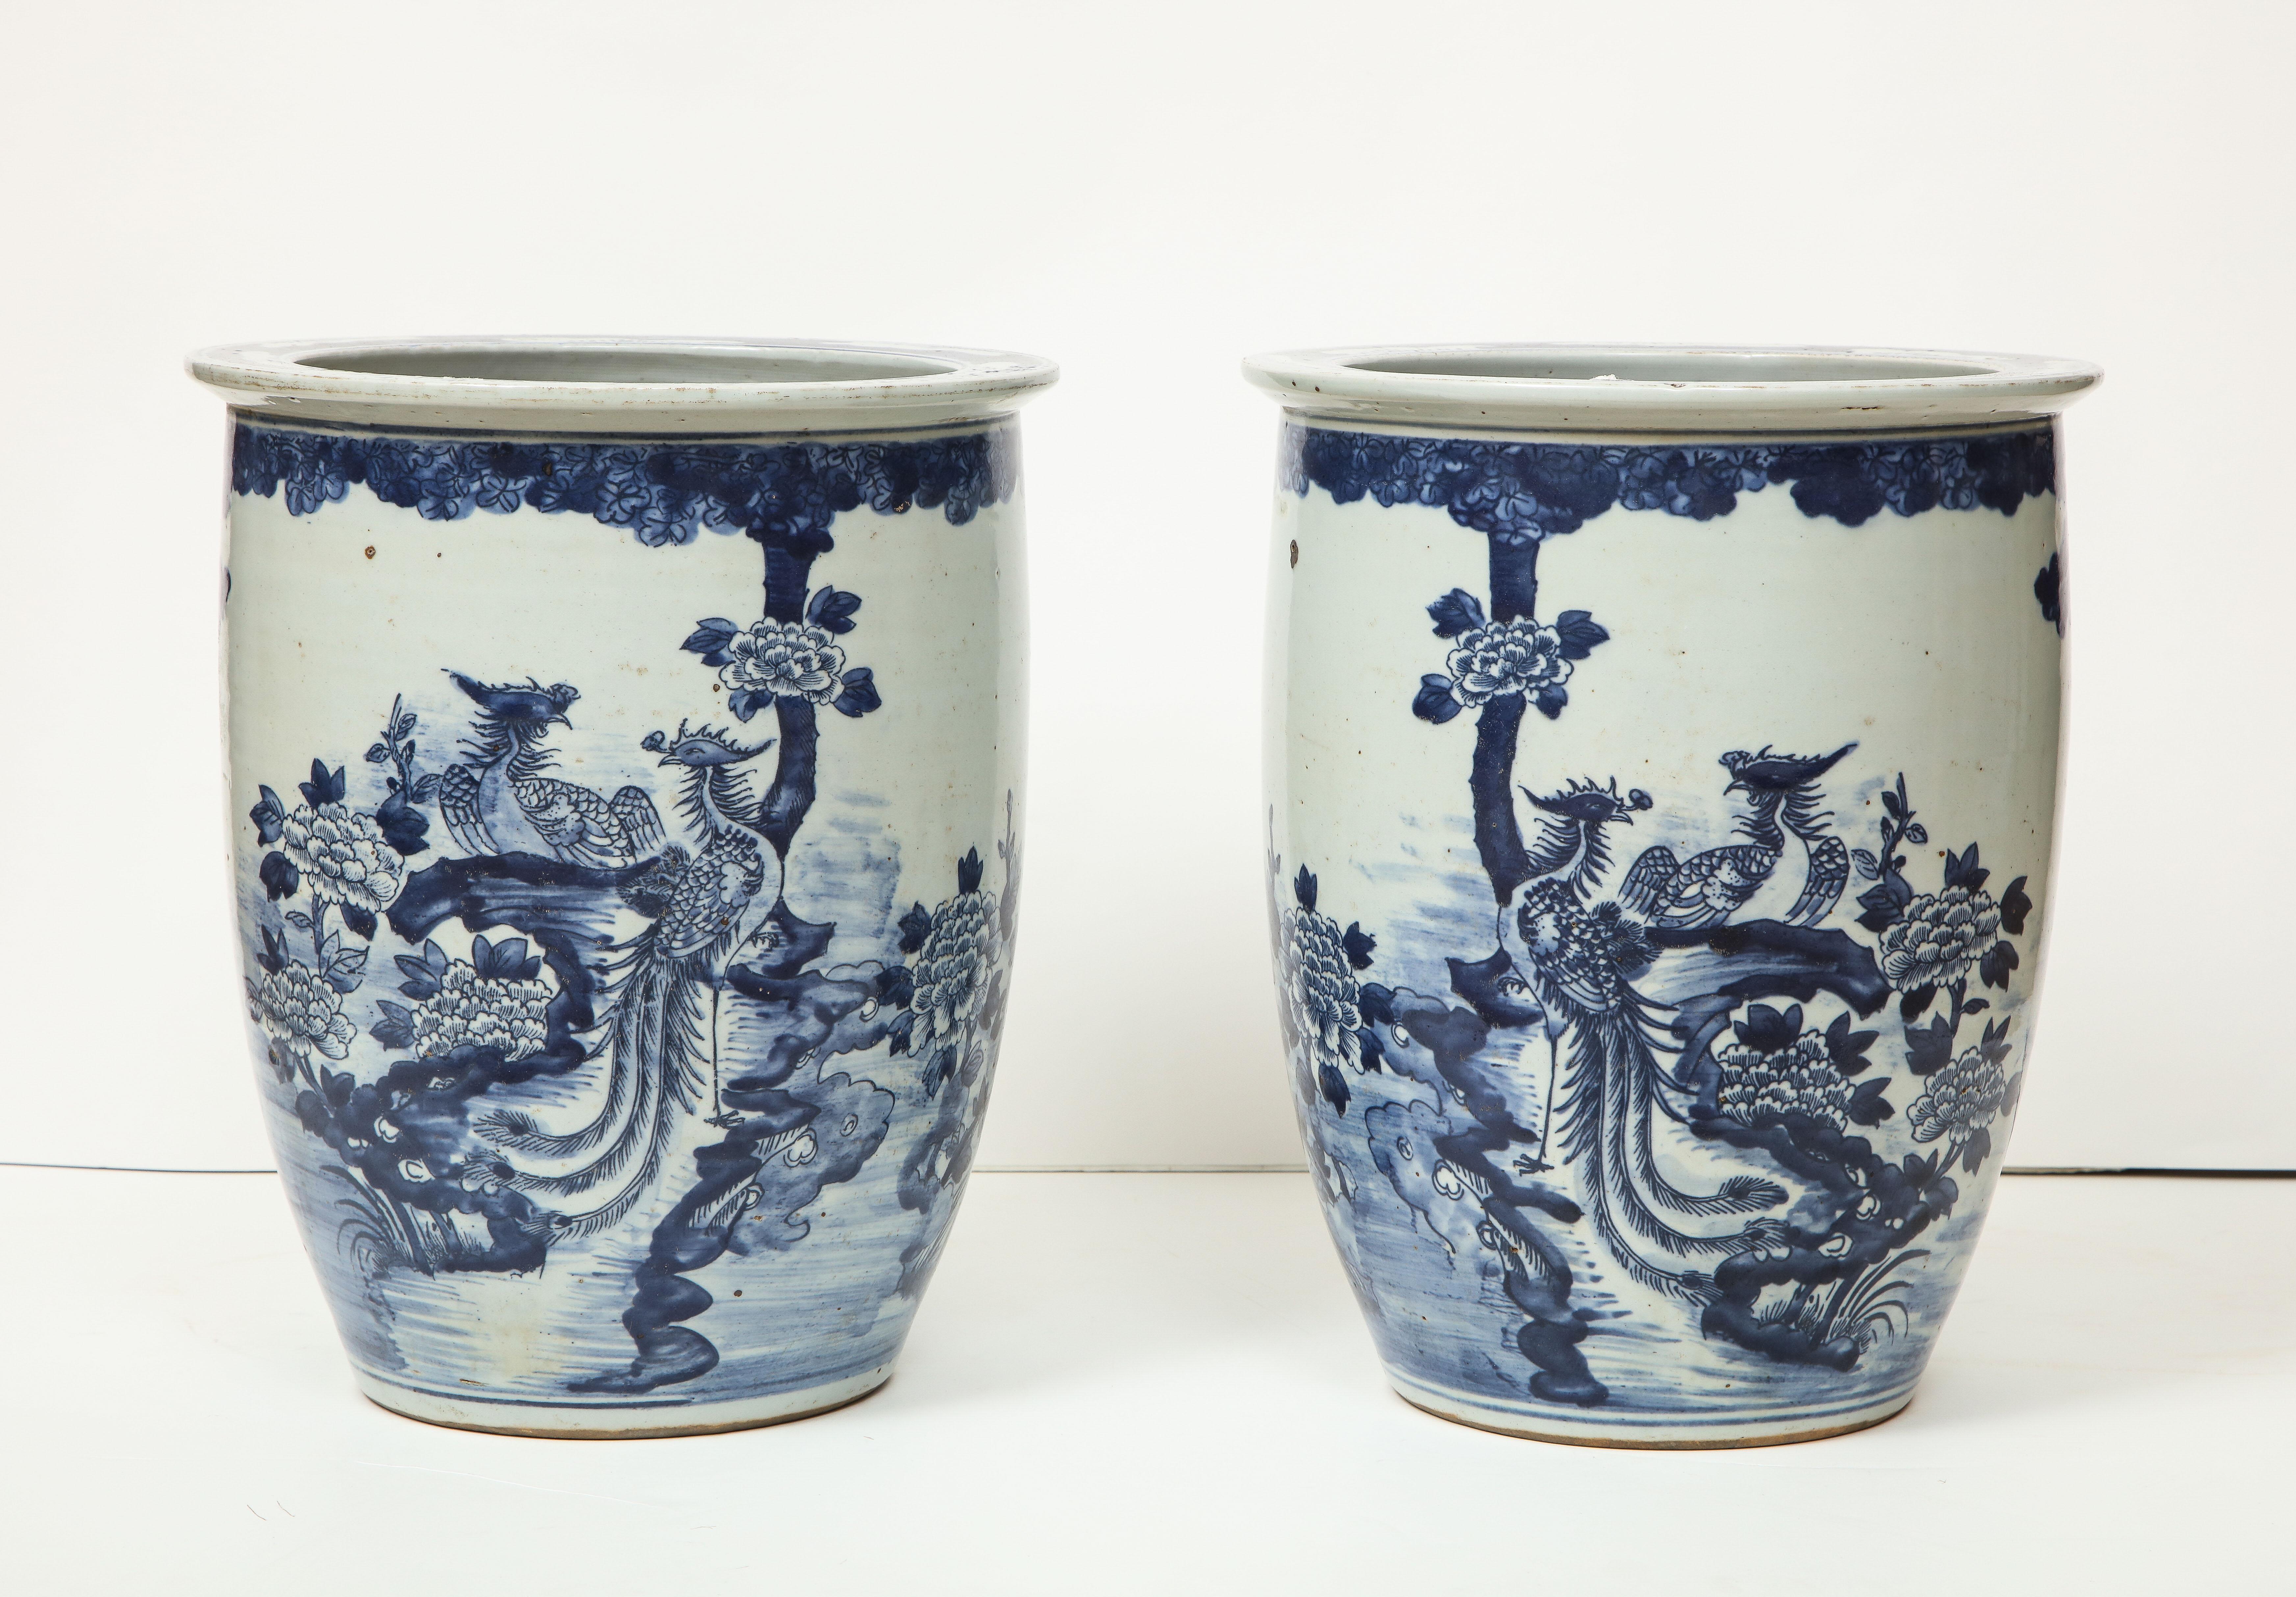 Blue and white goes with everything, and will never go out of fashion. These two Chinese export vases/cachepots look great as stand alone pieces or as vessels for flowers or plants. One side is more heavily decorated, while the other side features a